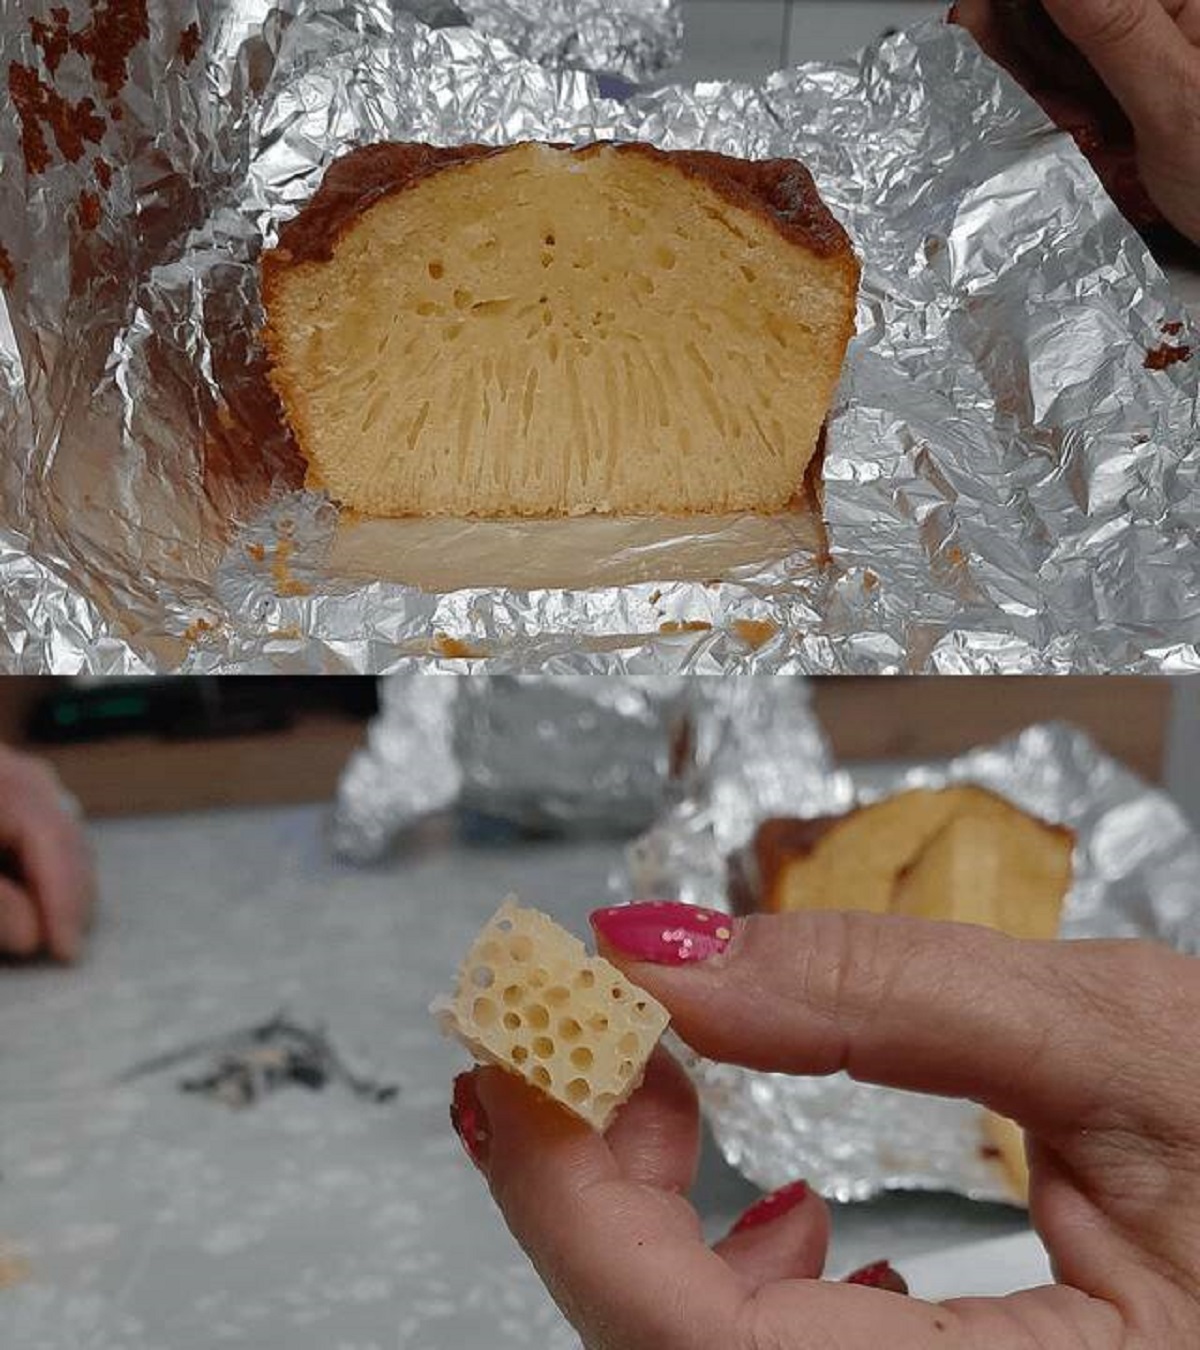 "The vertical bubbles in this homemade cake we baked"